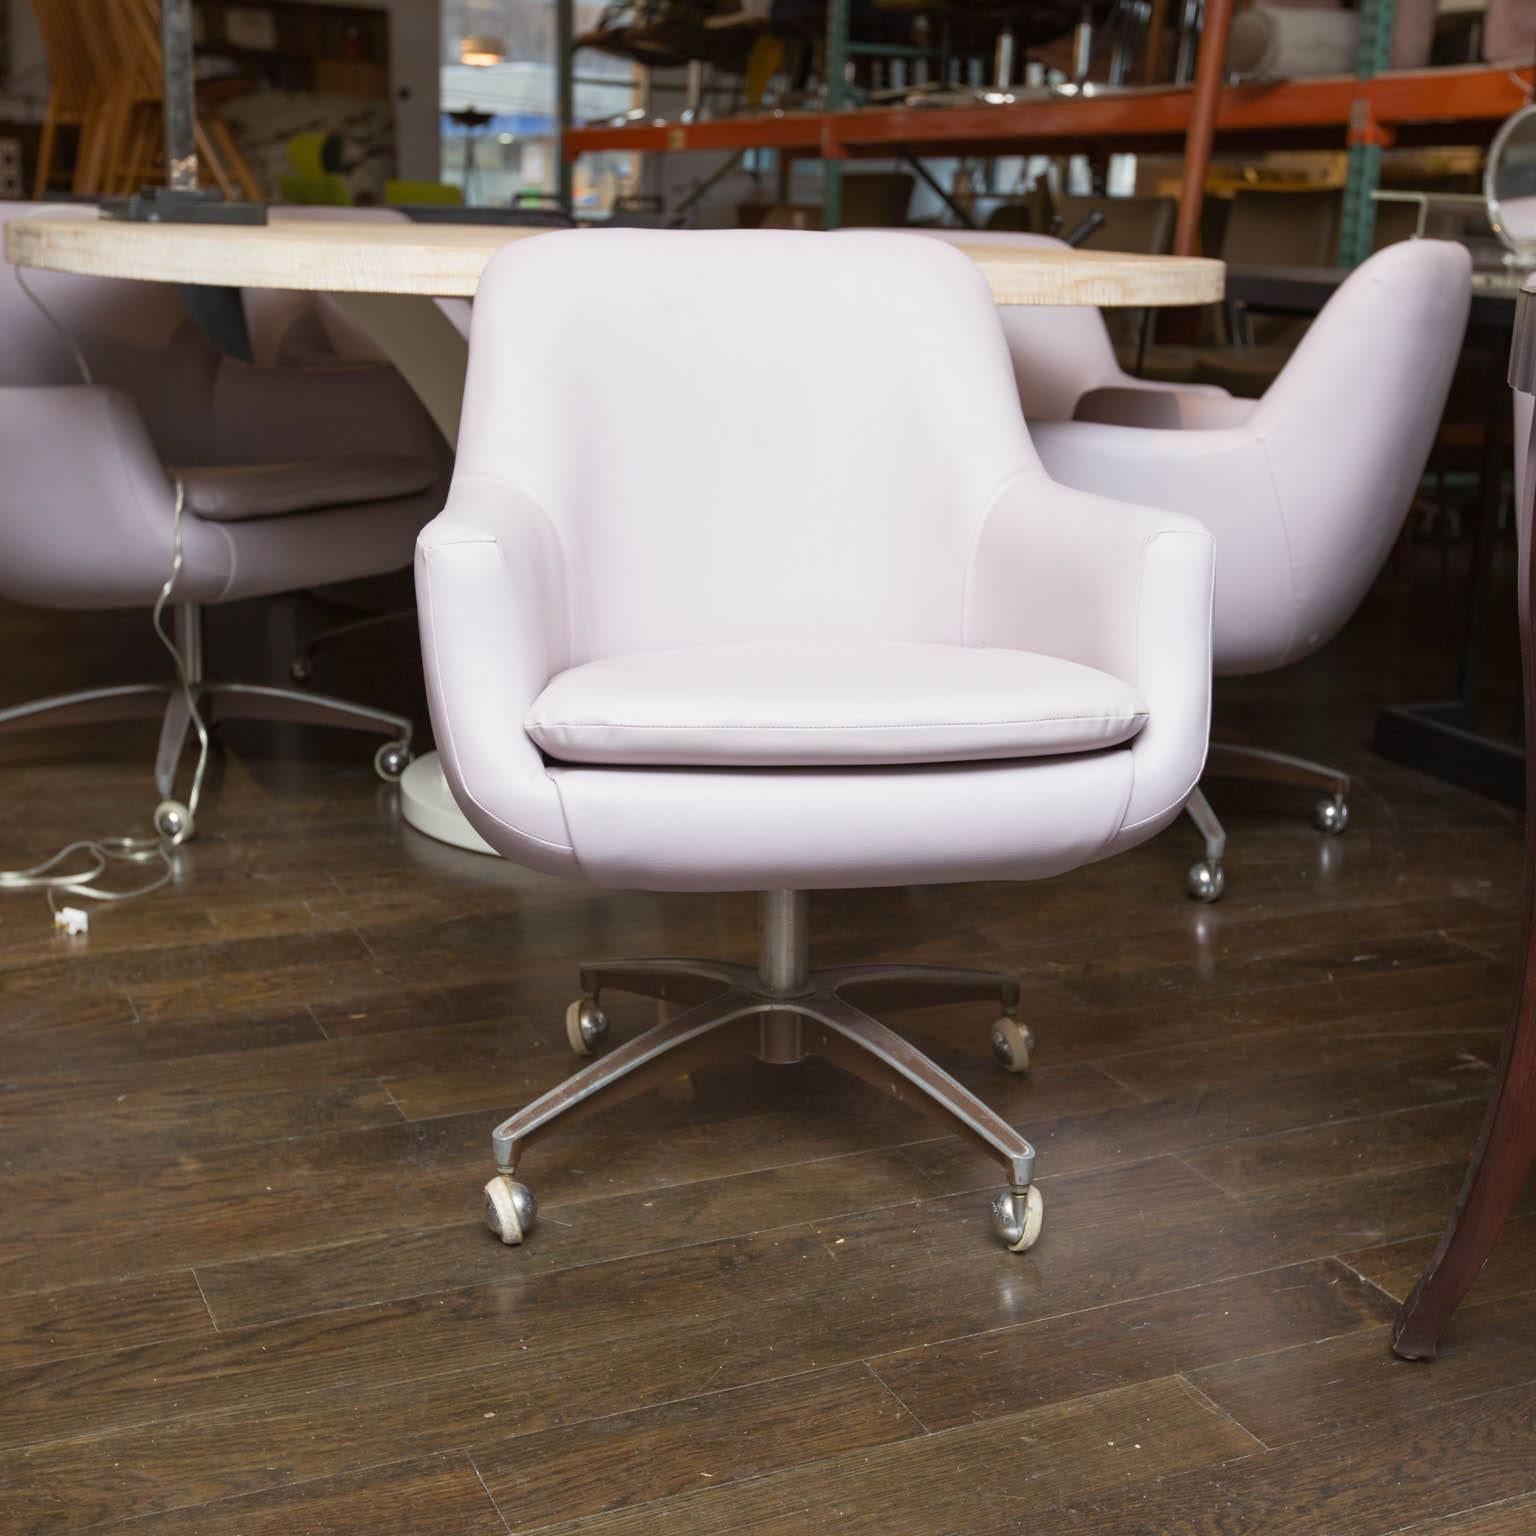 Covered in a mauve Naugahyde, these five chairs hail from the 1970s. Vintage castors still allow chairs to glide smoothly and chairs swivel just as readily.